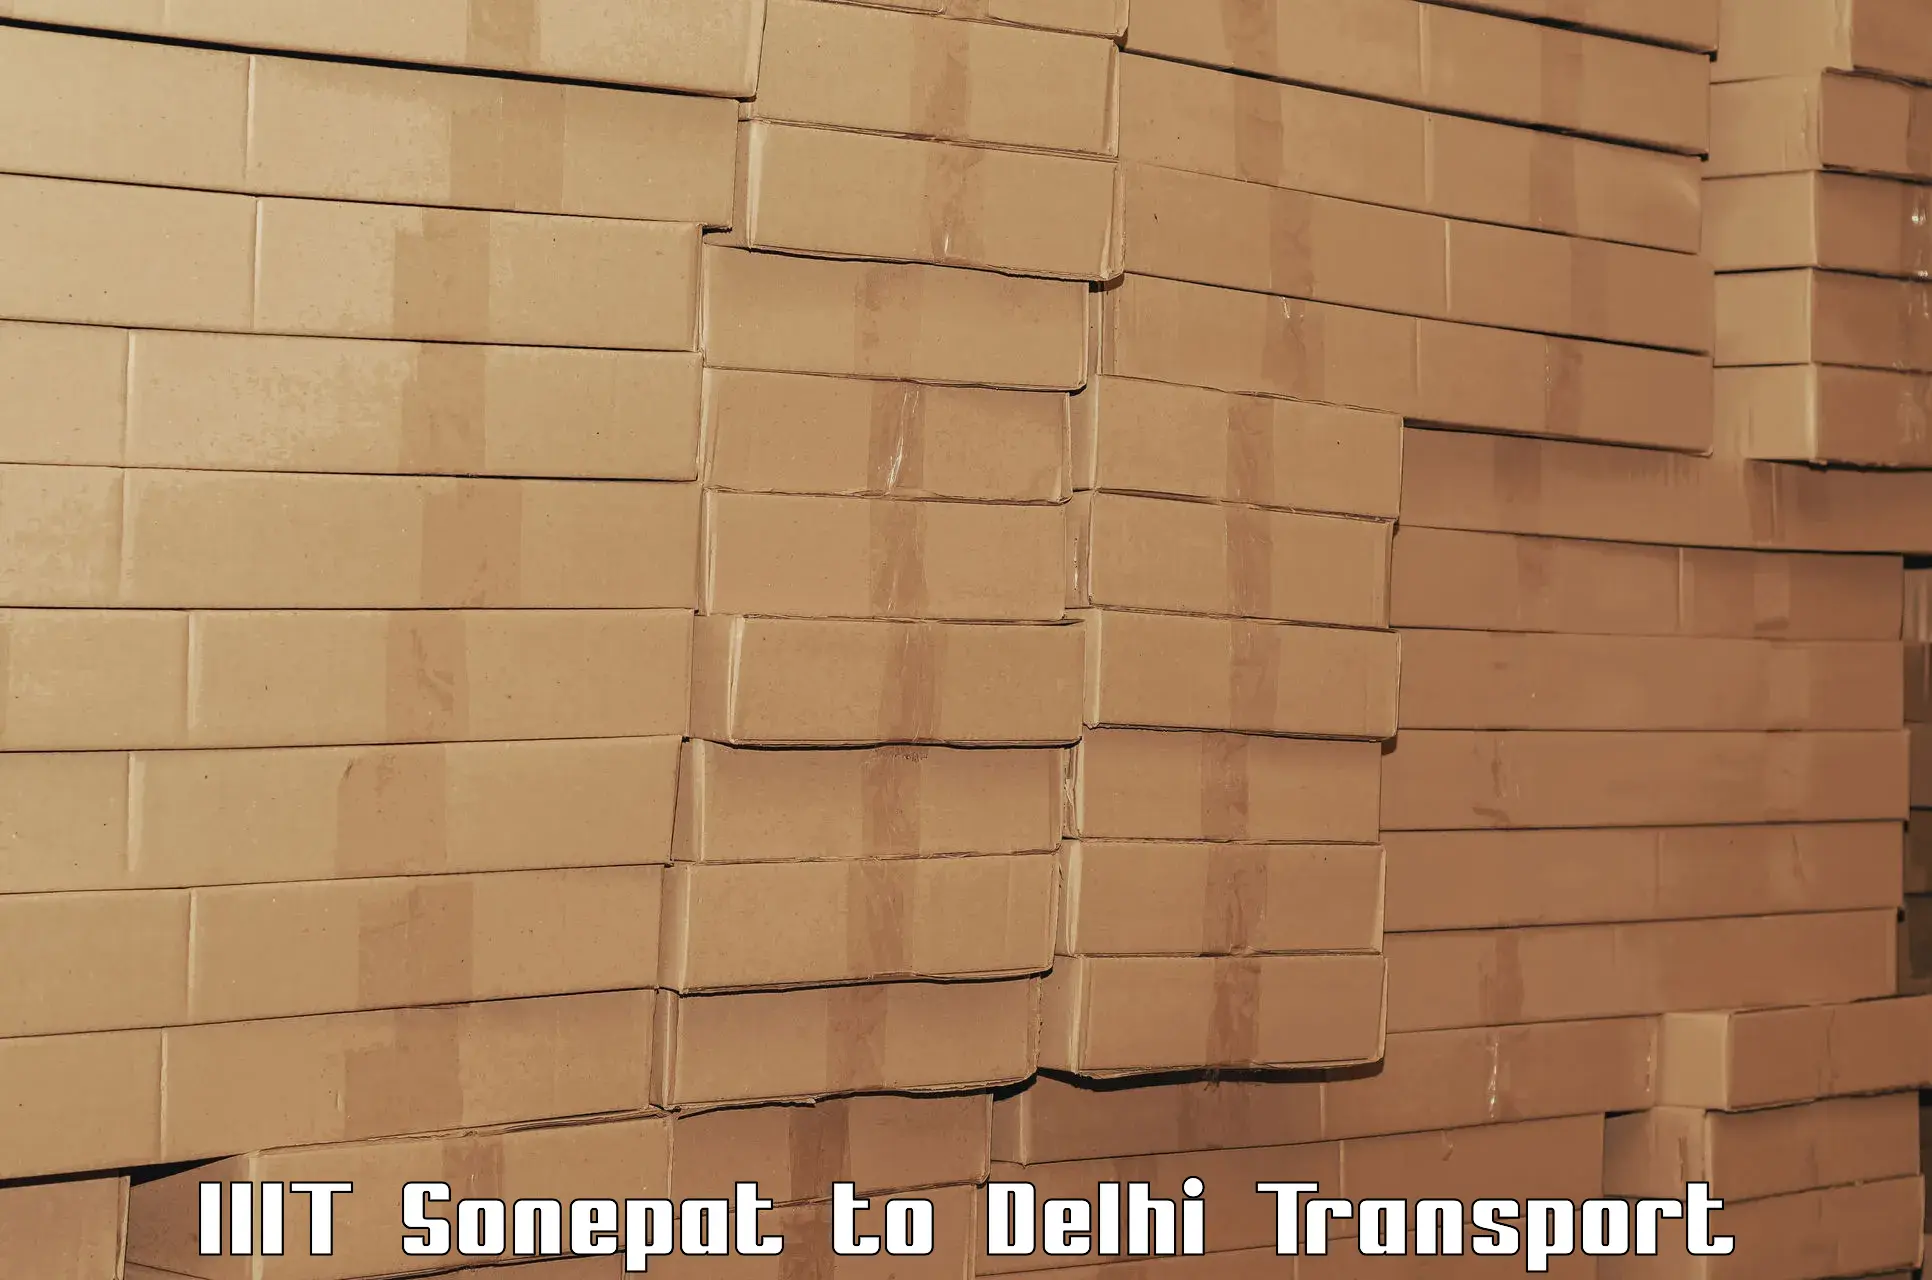 Express transport services IIIT Sonepat to NCR